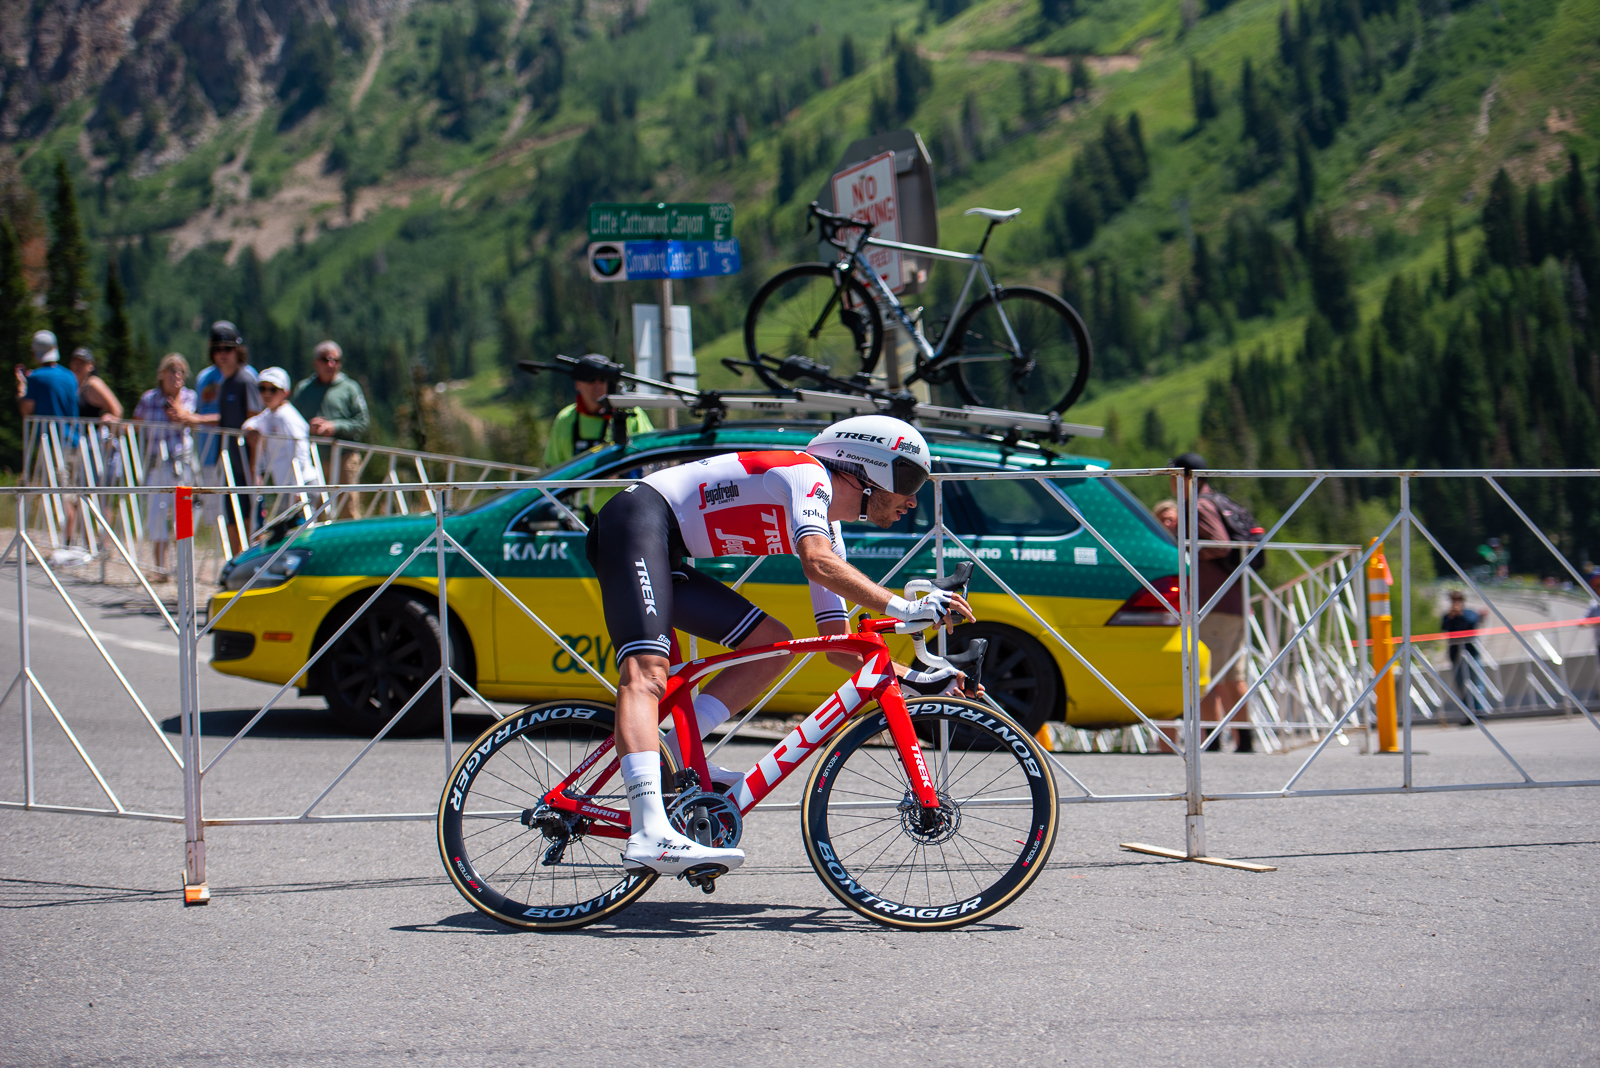 Nicholas DeBeaumarché (Trek-Segafredo) rounds the hairpin at the bottom of the Prologue course. 2019 Tour of Utah. Photo by Steven L